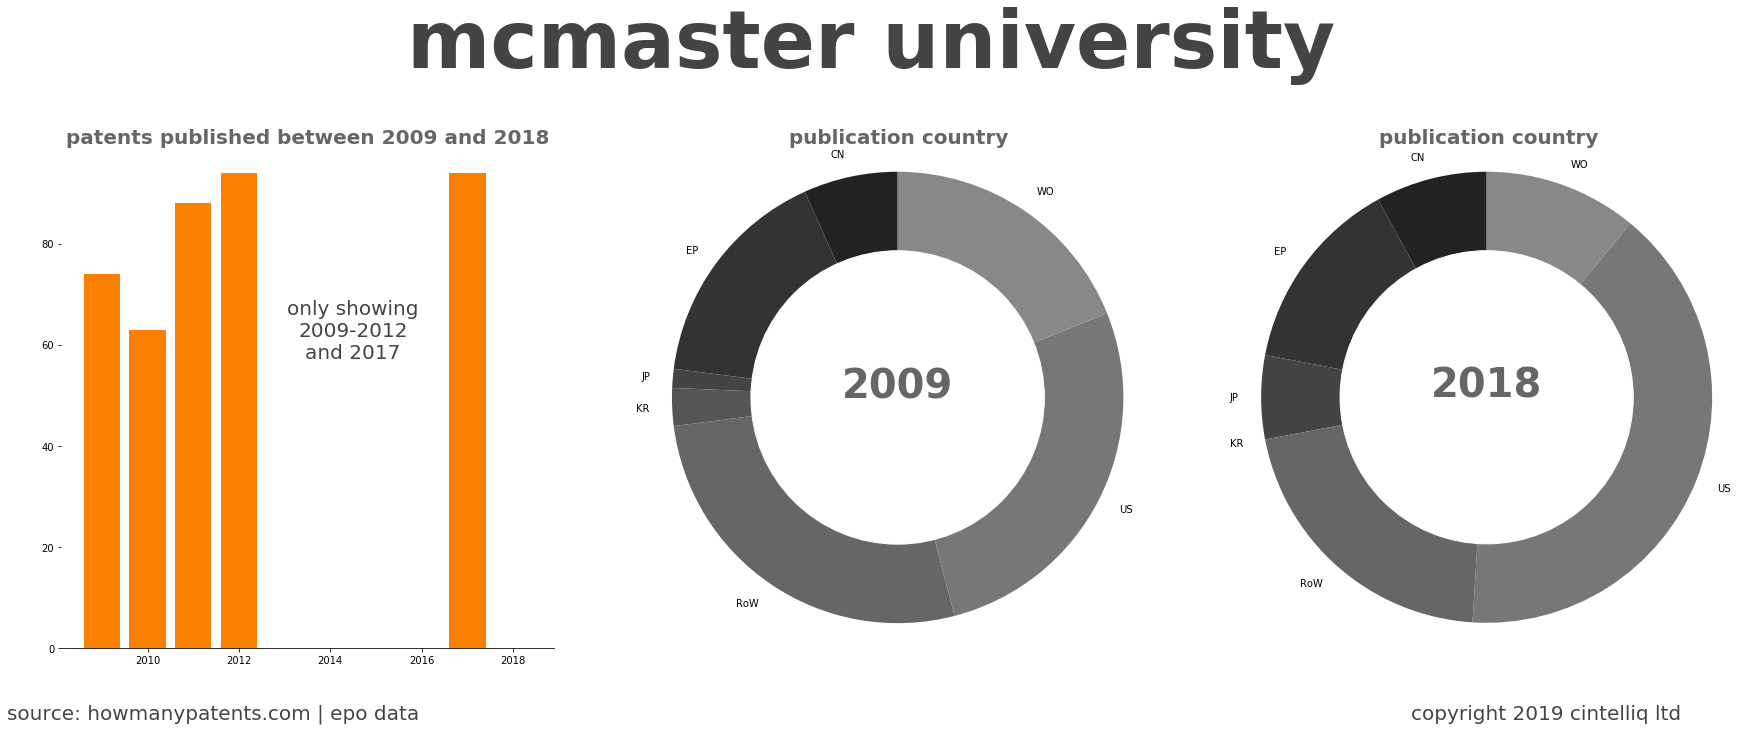 summary of patents for Mcmaster University